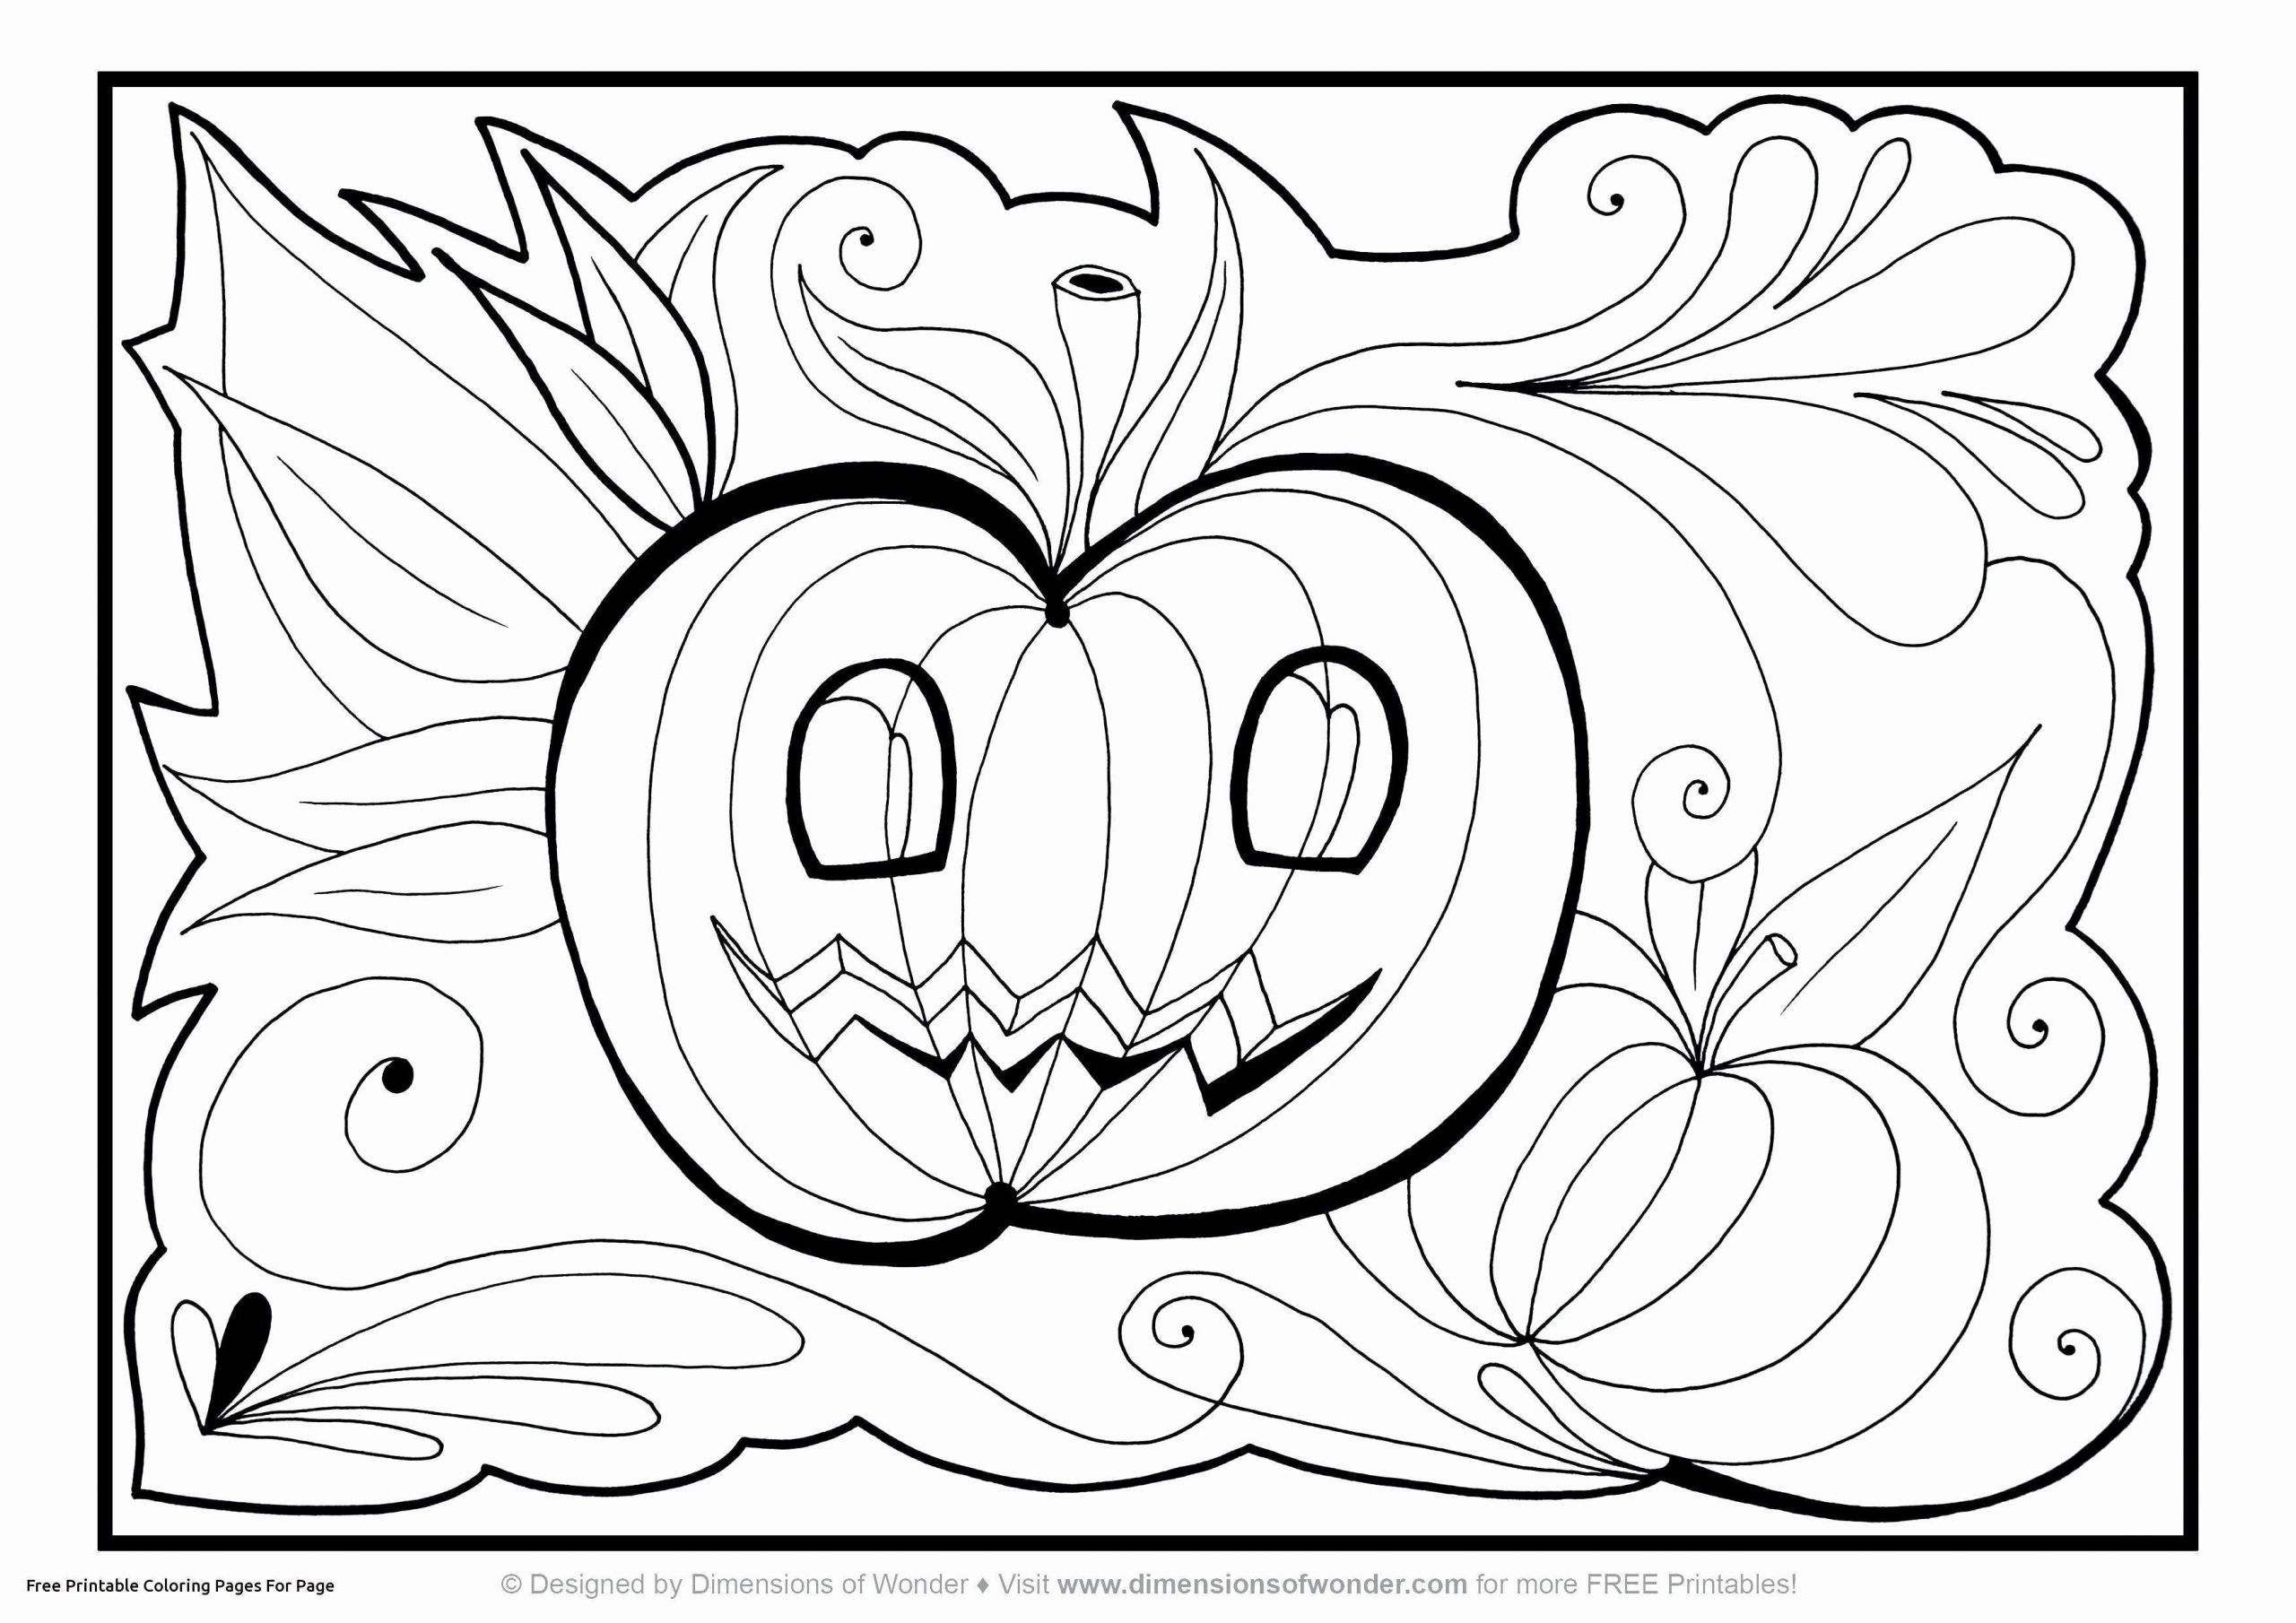 coloring pages : Free Halloween Coloring Sheets Unique Coloring Pages  Magnolia Flowers In 2020 Free Halloween Coloring Sheets ~  affiliateprogrambook.com